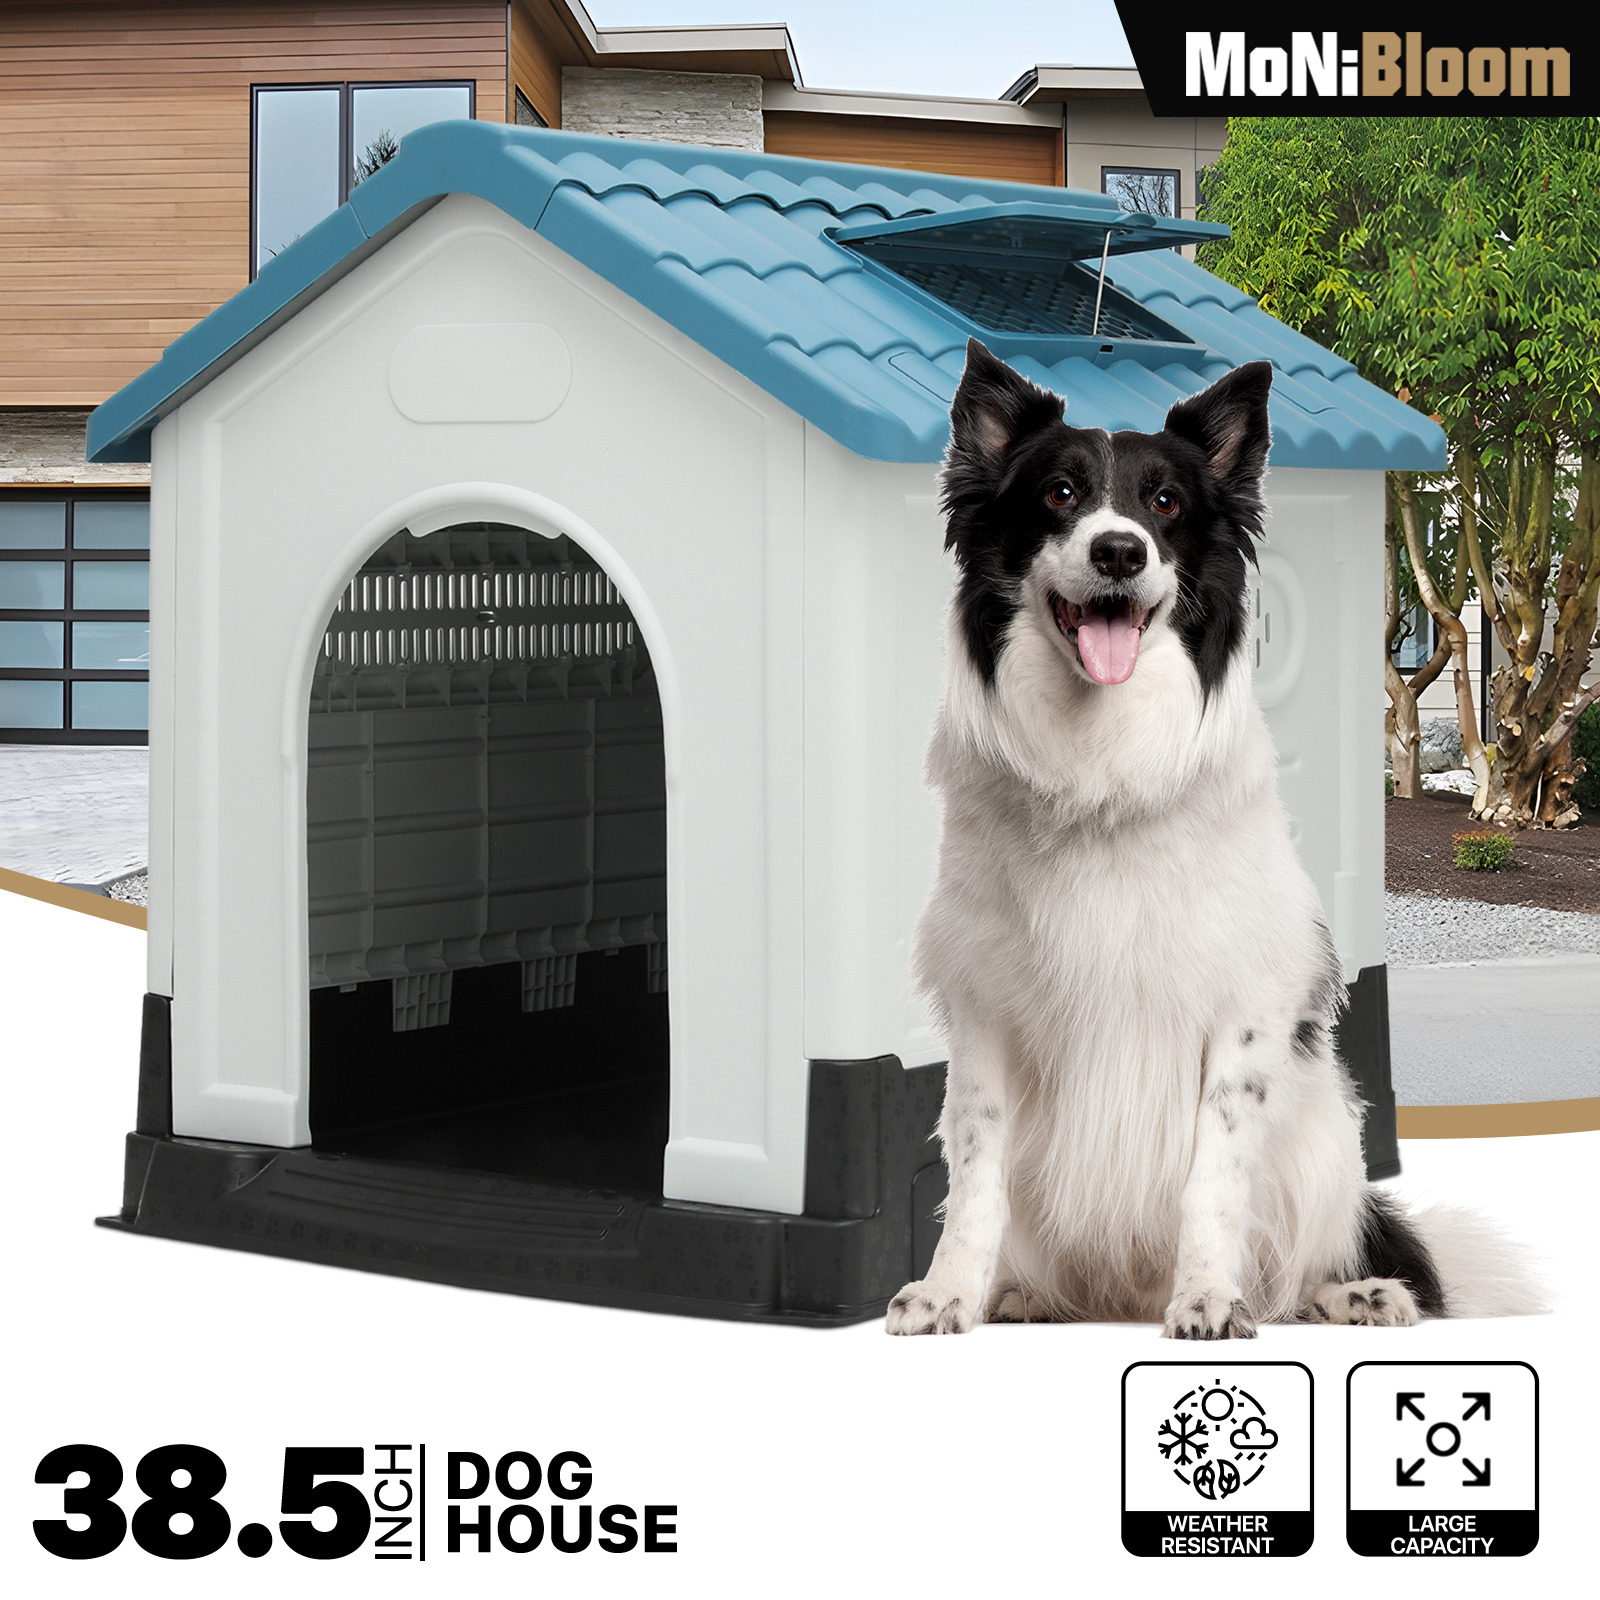 thinkstar 38" Plastic Dog House Puppy Pet Kennel Shelter W/Roof Skylight+Adjustable Vents